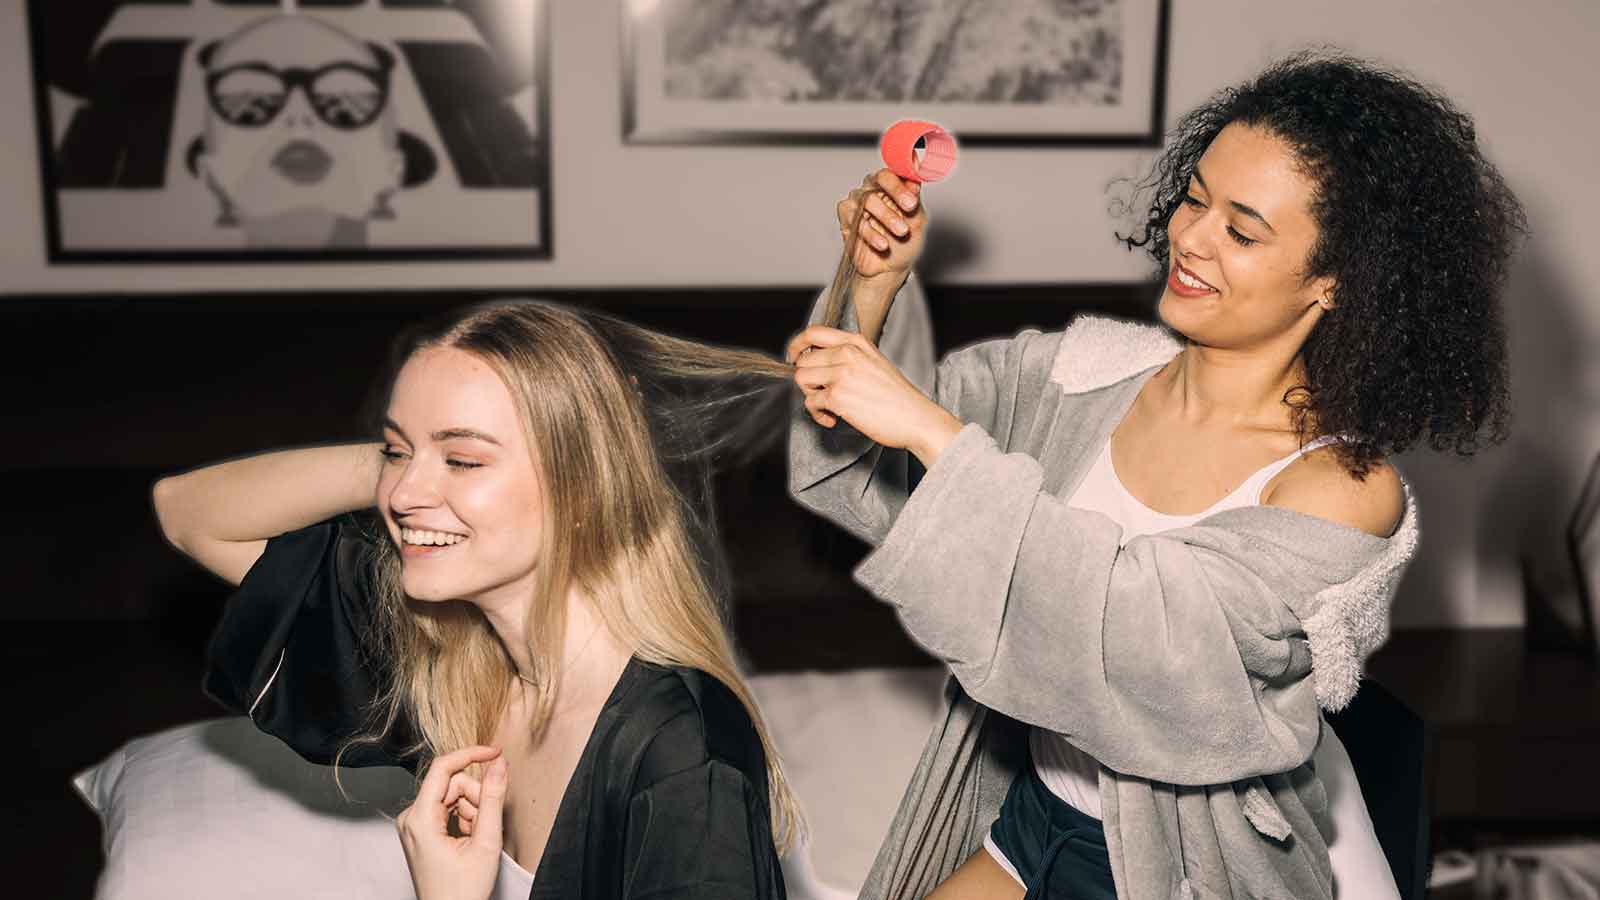 Two friends help each other install hair rollers.